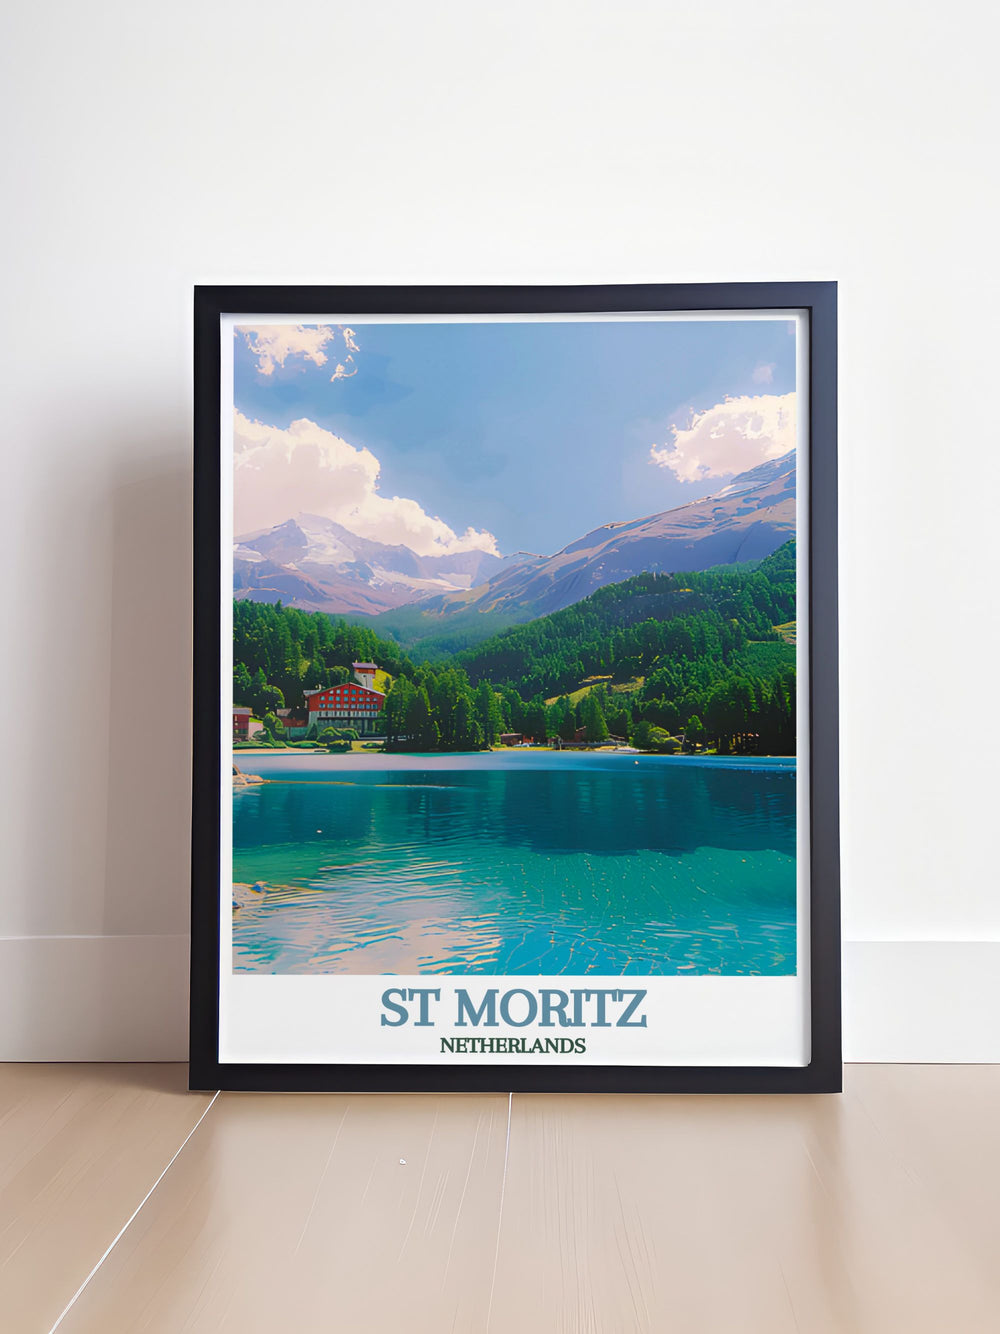 This travel poster captures the essence of St Moritz, renowned for its luxury and winter sports excellence, and the tranquil beauty of Lake St. Moritz.